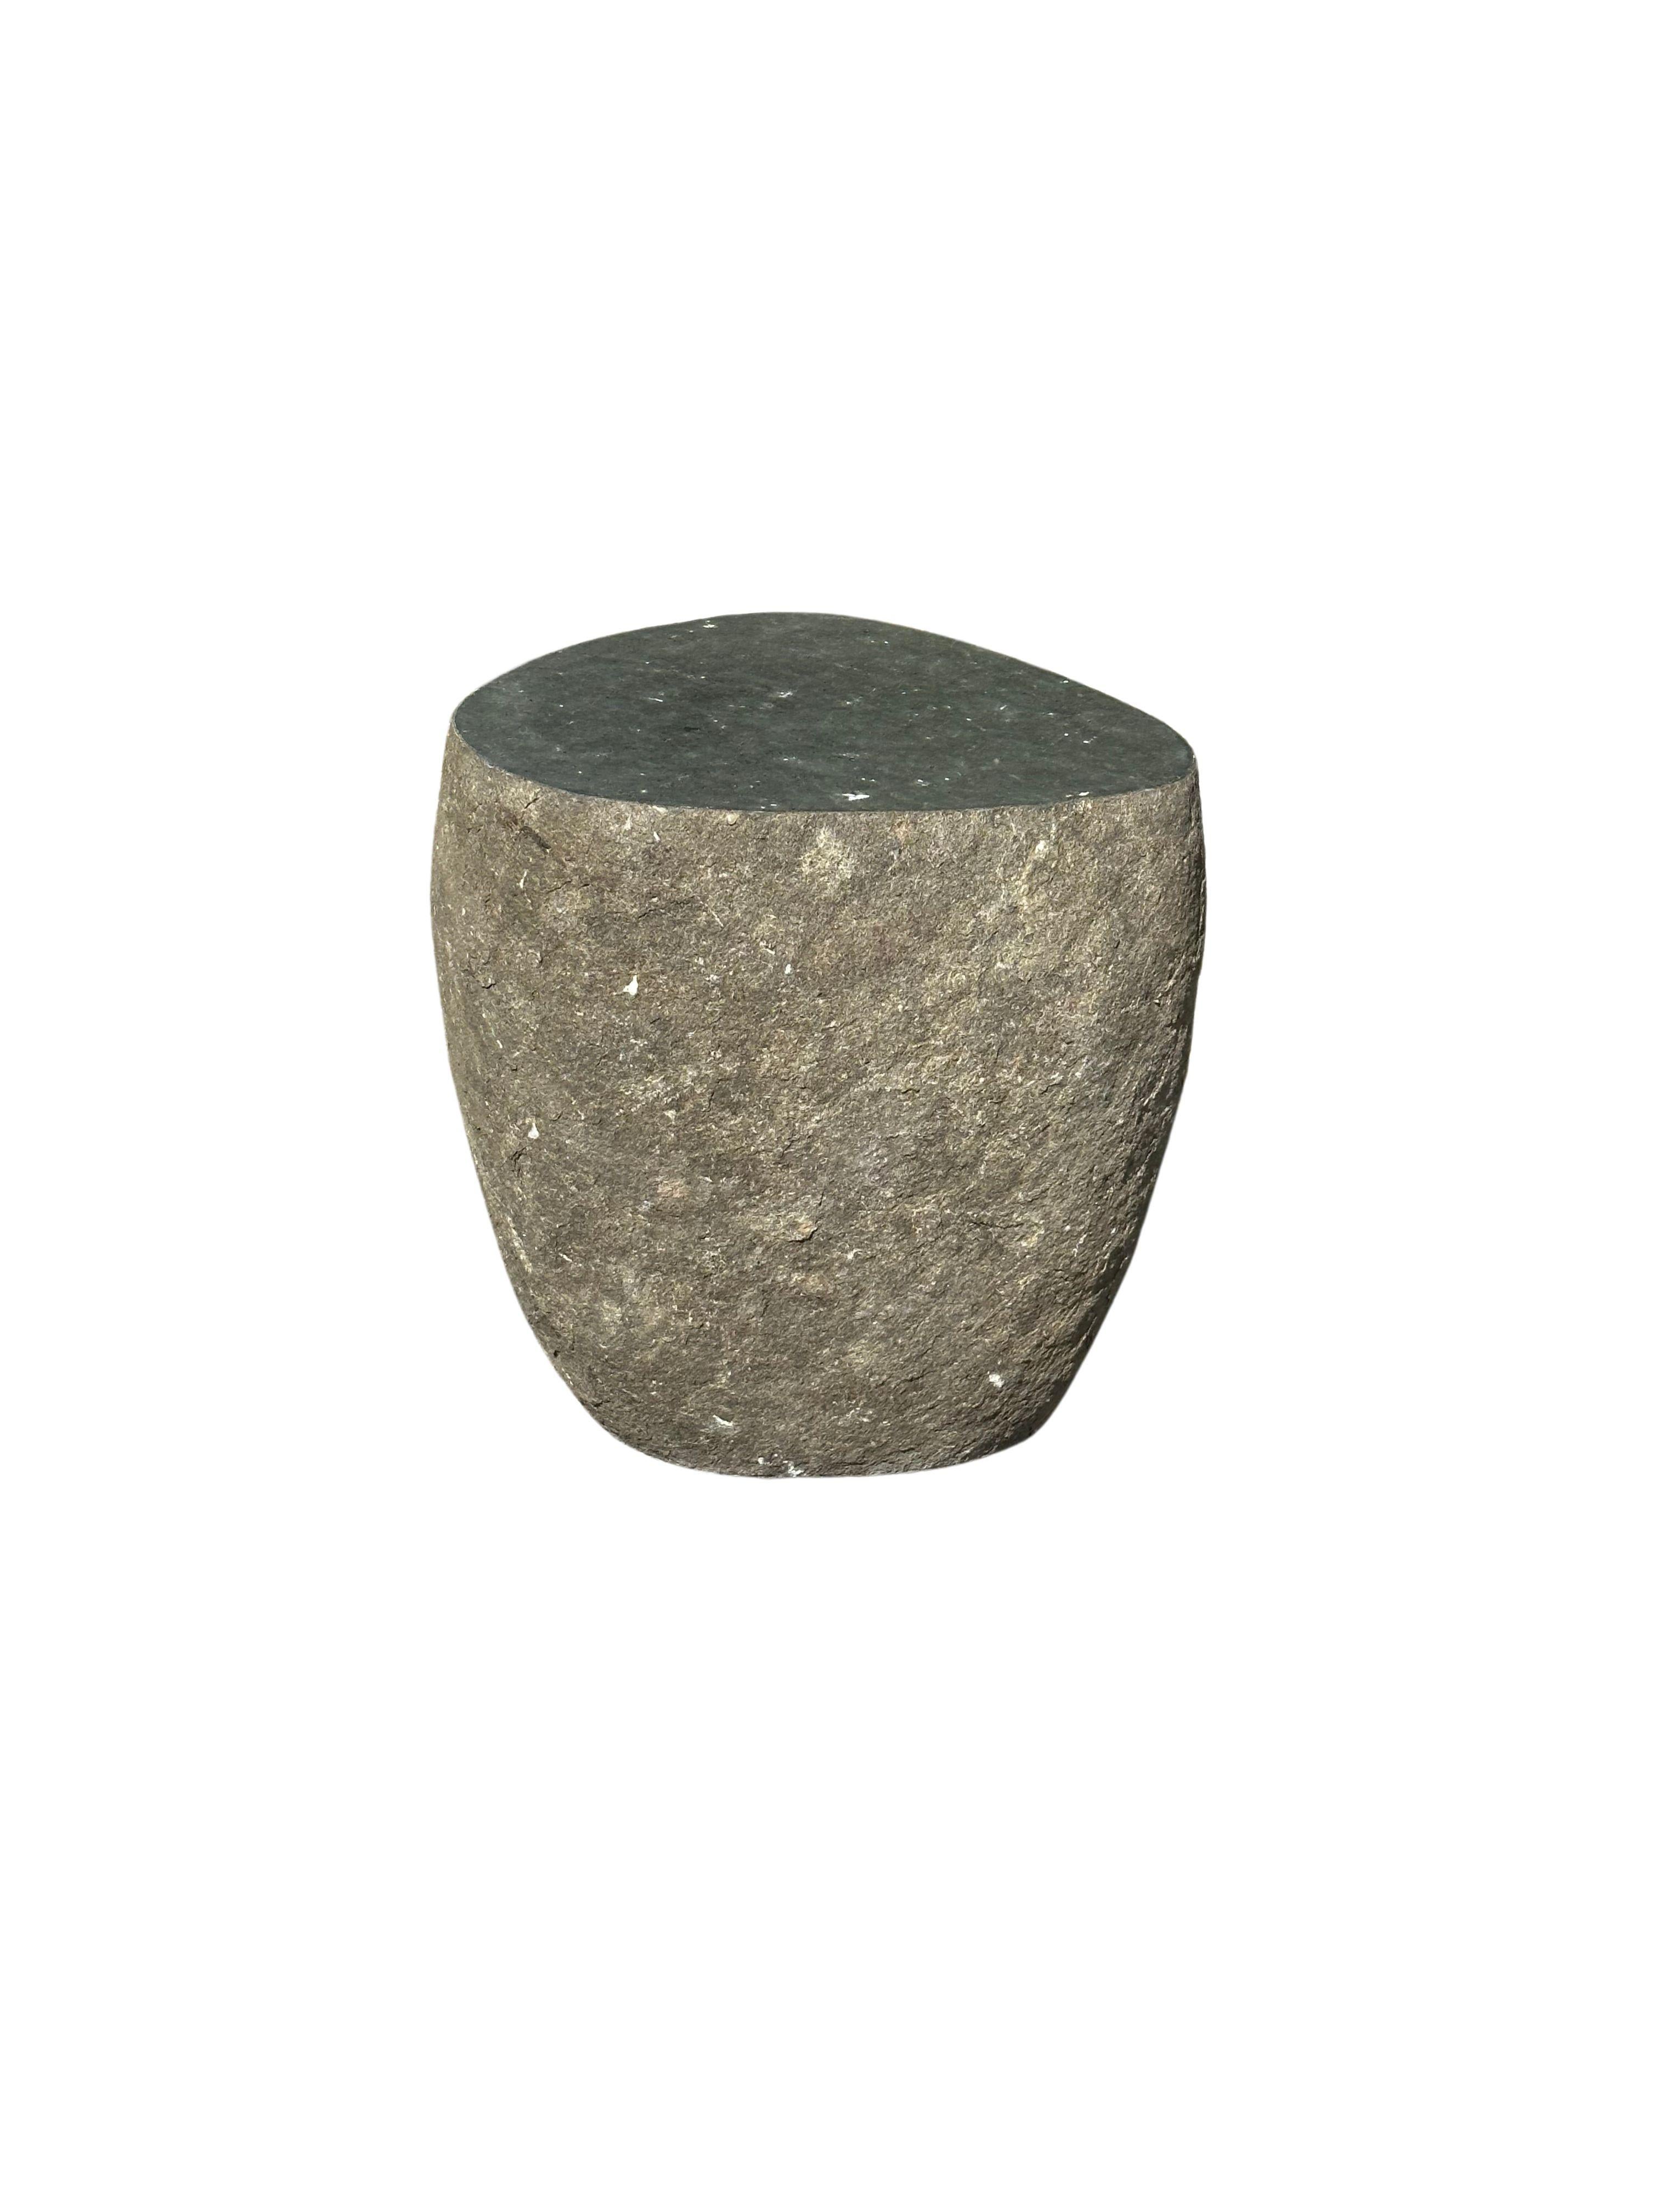 Organic Modern Solid Stone Side Table / Pedestal from Java, Indonesia For Sale